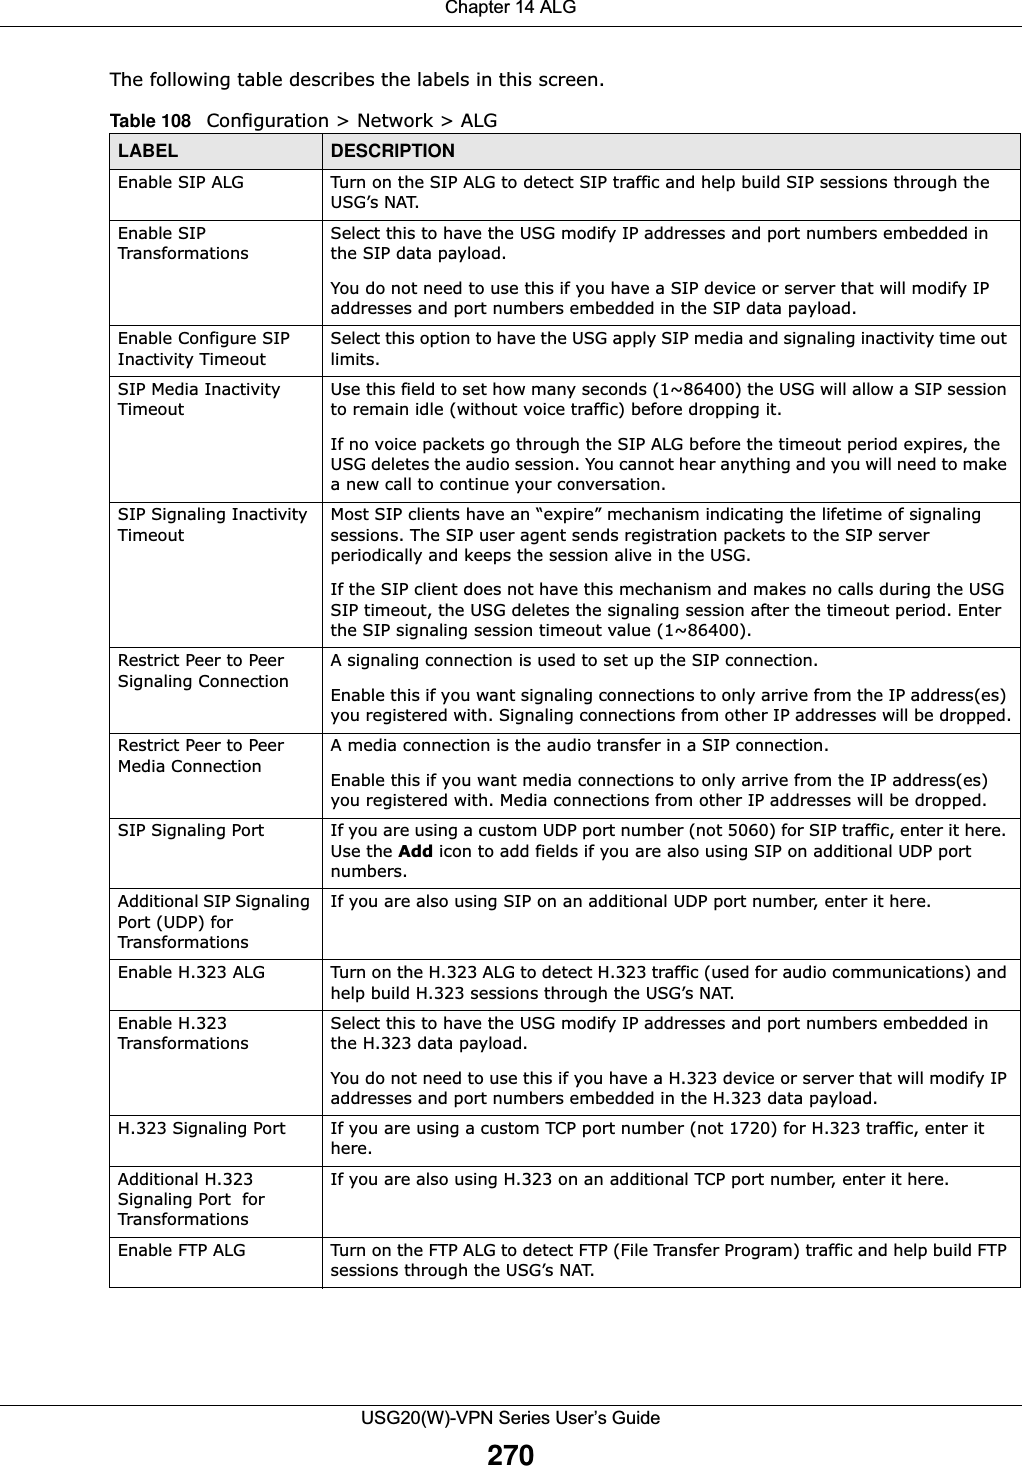 Chapter 14 ALGUSG20(W)-VPN Series User’s Guide270The following table describes the labels in this screen.   Table 108   Configuration &gt; Network &gt; ALGLABEL DESCRIPTIONEnable SIP ALG Turn on the SIP ALG to detect SIP traffic and help build SIP sessions through the USG’s NAT.Enable SIP TransformationsSelect this to have the USG modify IP addresses and port numbers embedded in the SIP data payload. You do not need to use this if you have a SIP device or server that will modify IP addresses and port numbers embedded in the SIP data payload.Enable Configure SIP Inactivity TimeoutSelect this option to have the USG apply SIP media and signaling inactivity time out limits. SIP Media Inactivity TimeoutUse this field to set how many seconds (1~86400) the USG will allow a SIP session to remain idle (without voice traffic) before dropping it.If no voice packets go through the SIP ALG before the timeout period expires, the USG deletes the audio session. You cannot hear anything and you will need to make a new call to continue your conversation.SIP Signaling Inactivity TimeoutMost SIP clients have an “expire” mechanism indicating the lifetime of signaling sessions. The SIP user agent sends registration packets to the SIP server periodically and keeps the session alive in the USG. If the SIP client does not have this mechanism and makes no calls during the USG SIP timeout, the USG deletes the signaling session after the timeout period. Enter the SIP signaling session timeout value (1~86400).Restrict Peer to Peer Signaling ConnectionA signaling connection is used to set up the SIP connection.Enable this if you want signaling connections to only arrive from the IP address(es) you registered with. Signaling connections from other IP addresses will be dropped.Restrict Peer to Peer Media ConnectionA media connection is the audio transfer in a SIP connection.Enable this if you want media connections to only arrive from the IP address(es) you registered with. Media connections from other IP addresses will be dropped.SIP Signaling Port  If you are using a custom UDP port number (not 5060) for SIP traffic, enter it here. Use the Add icon to add fields if you are also using SIP on additional UDP port numbers.Additional SIP Signaling Port (UDP) for TransformationsIf you are also using SIP on an additional UDP port number, enter it here.Enable H.323 ALG Turn on the H.323 ALG to detect H.323 traffic (used for audio communications) and help build H.323 sessions through the USG’s NAT.Enable H.323 TransformationsSelect this to have the USG modify IP addresses and port numbers embedded in the H.323 data payload. You do not need to use this if you have a H.323 device or server that will modify IP addresses and port numbers embedded in the H.323 data payload.H.323 Signaling Port  If you are using a custom TCP port number (not 1720) for H.323 traffic, enter it here. Additional H.323 Signaling Port  for TransformationsIf you are also using H.323 on an additional TCP port number, enter it here. Enable FTP ALG Turn on the FTP ALG to detect FTP (File Transfer Program) traffic and help build FTP sessions through the USG’s NAT.